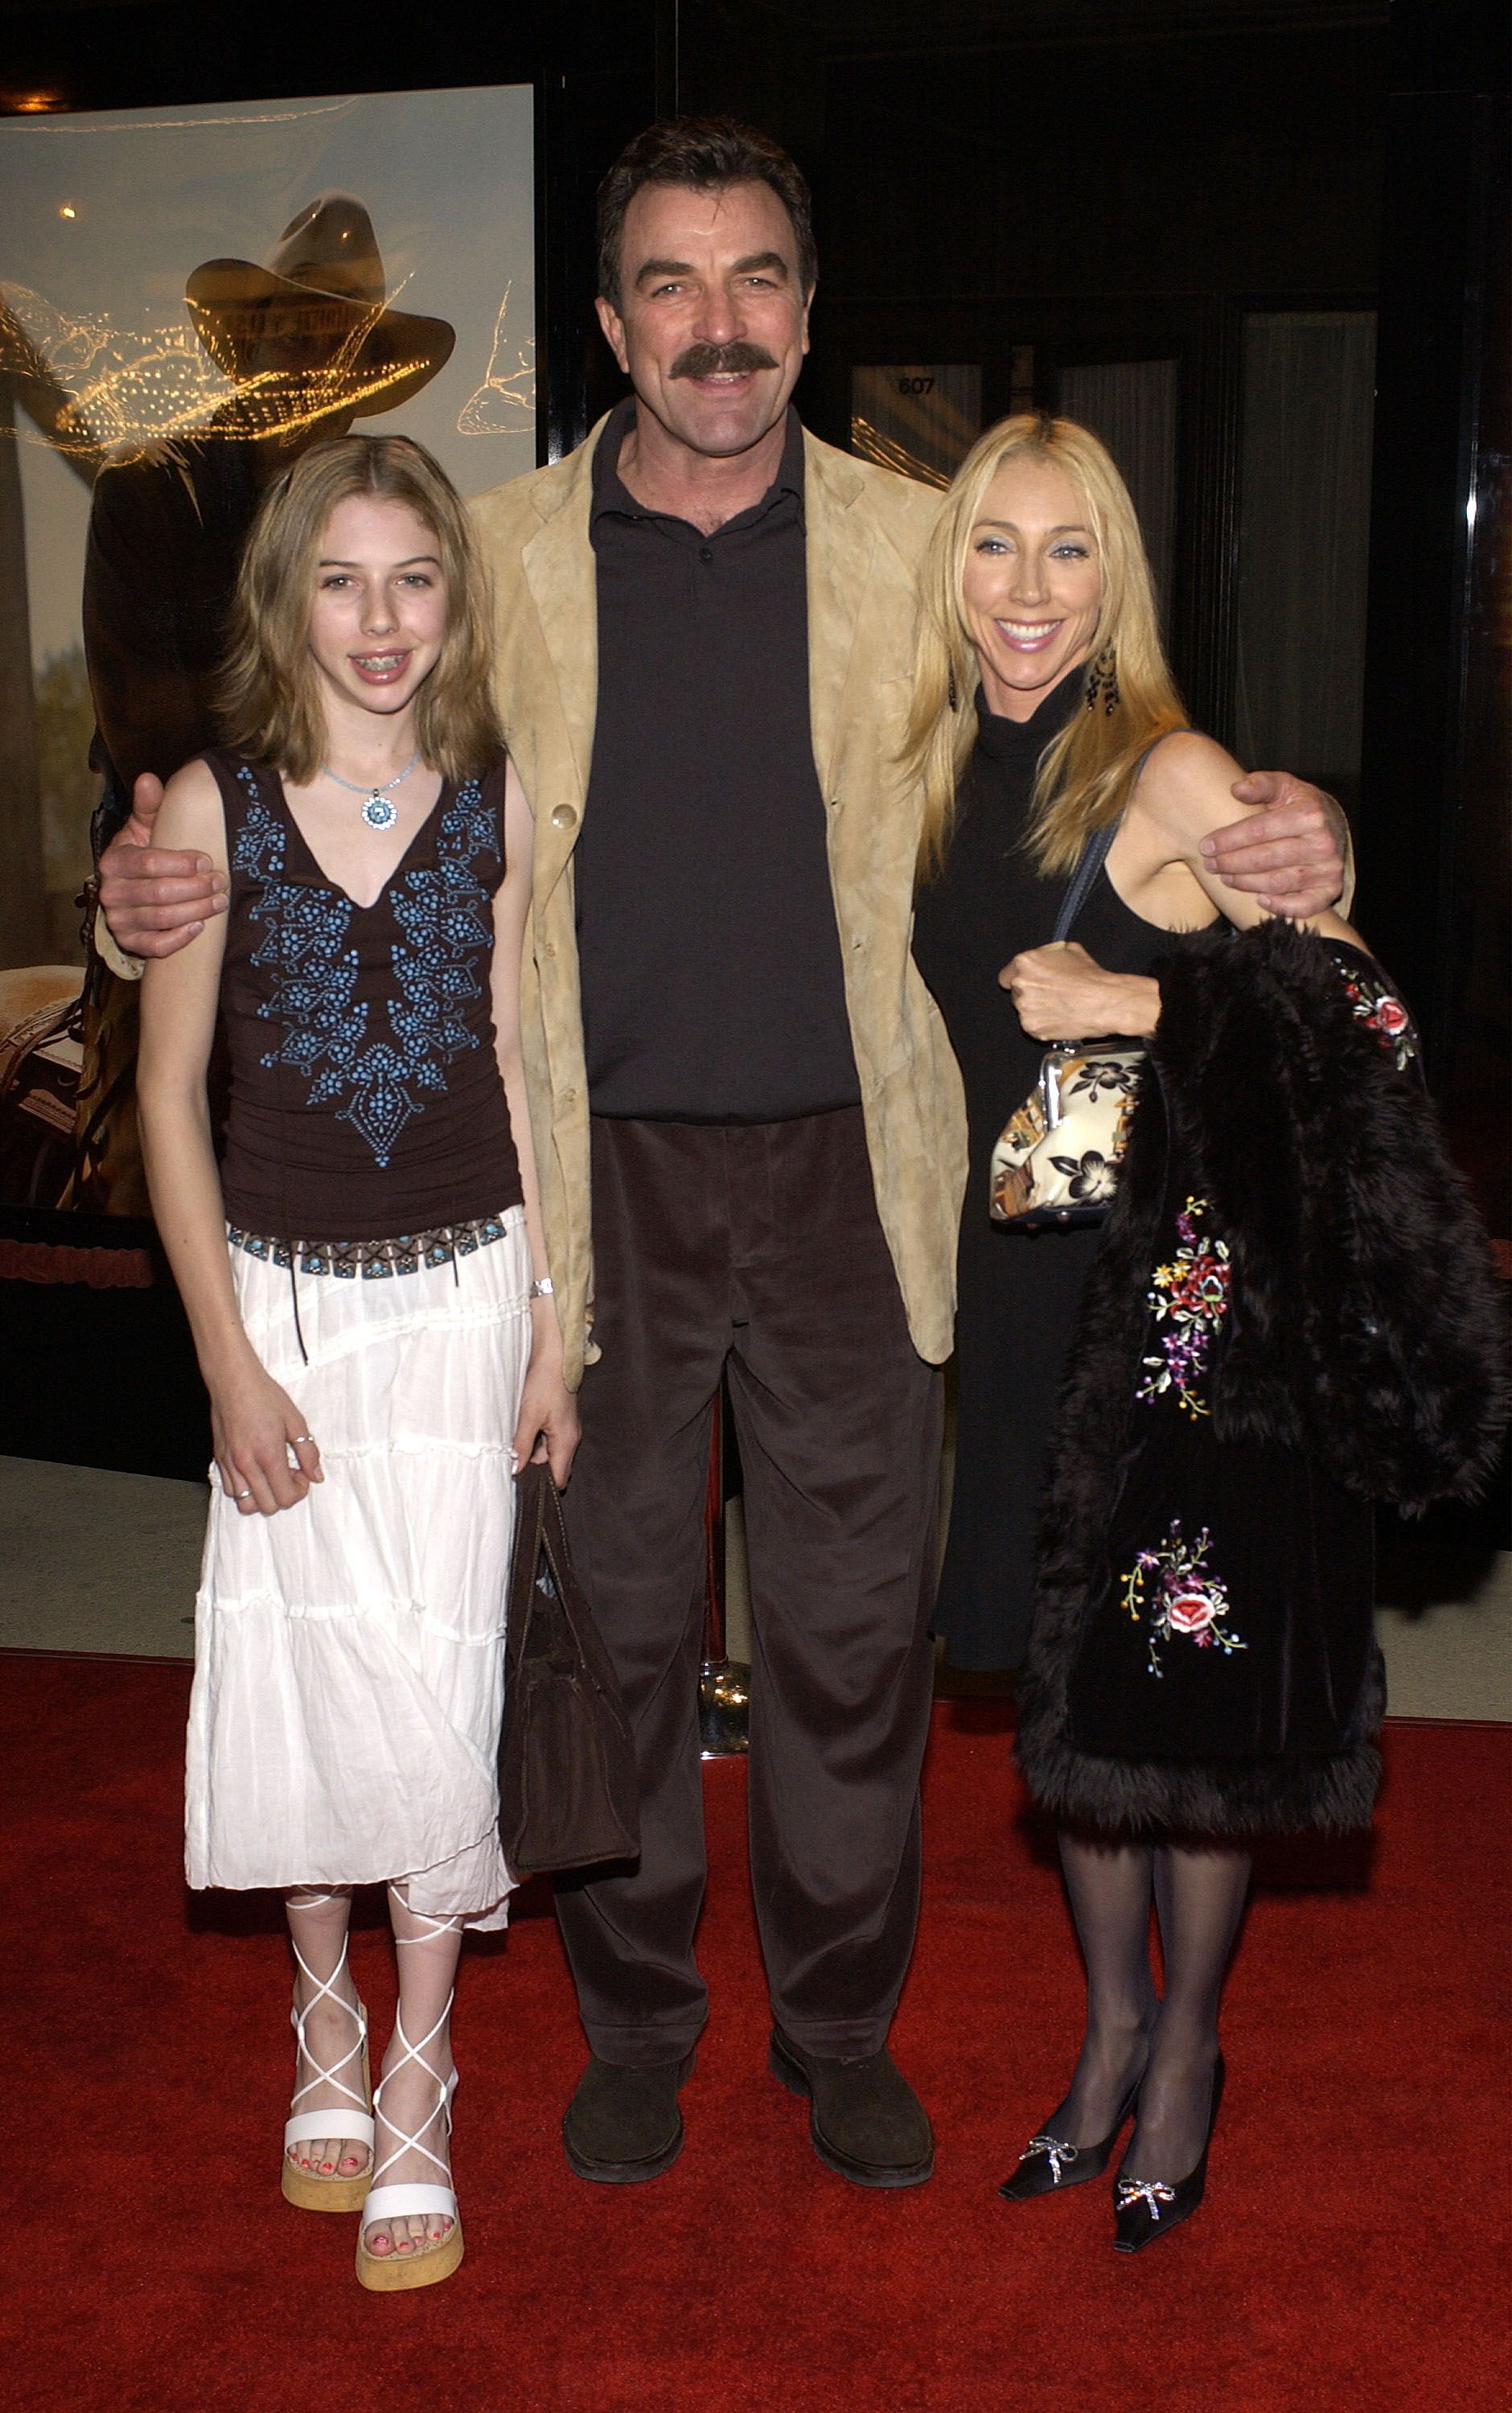 Hannah and Tom Selleck, and Jillie Joan Mack at the premiere of the movie "Monte Walsh" on January 8, 2003, at the Warner Bros. Studios in Burbank, California | Photo: Vince Bucci/Getty Images